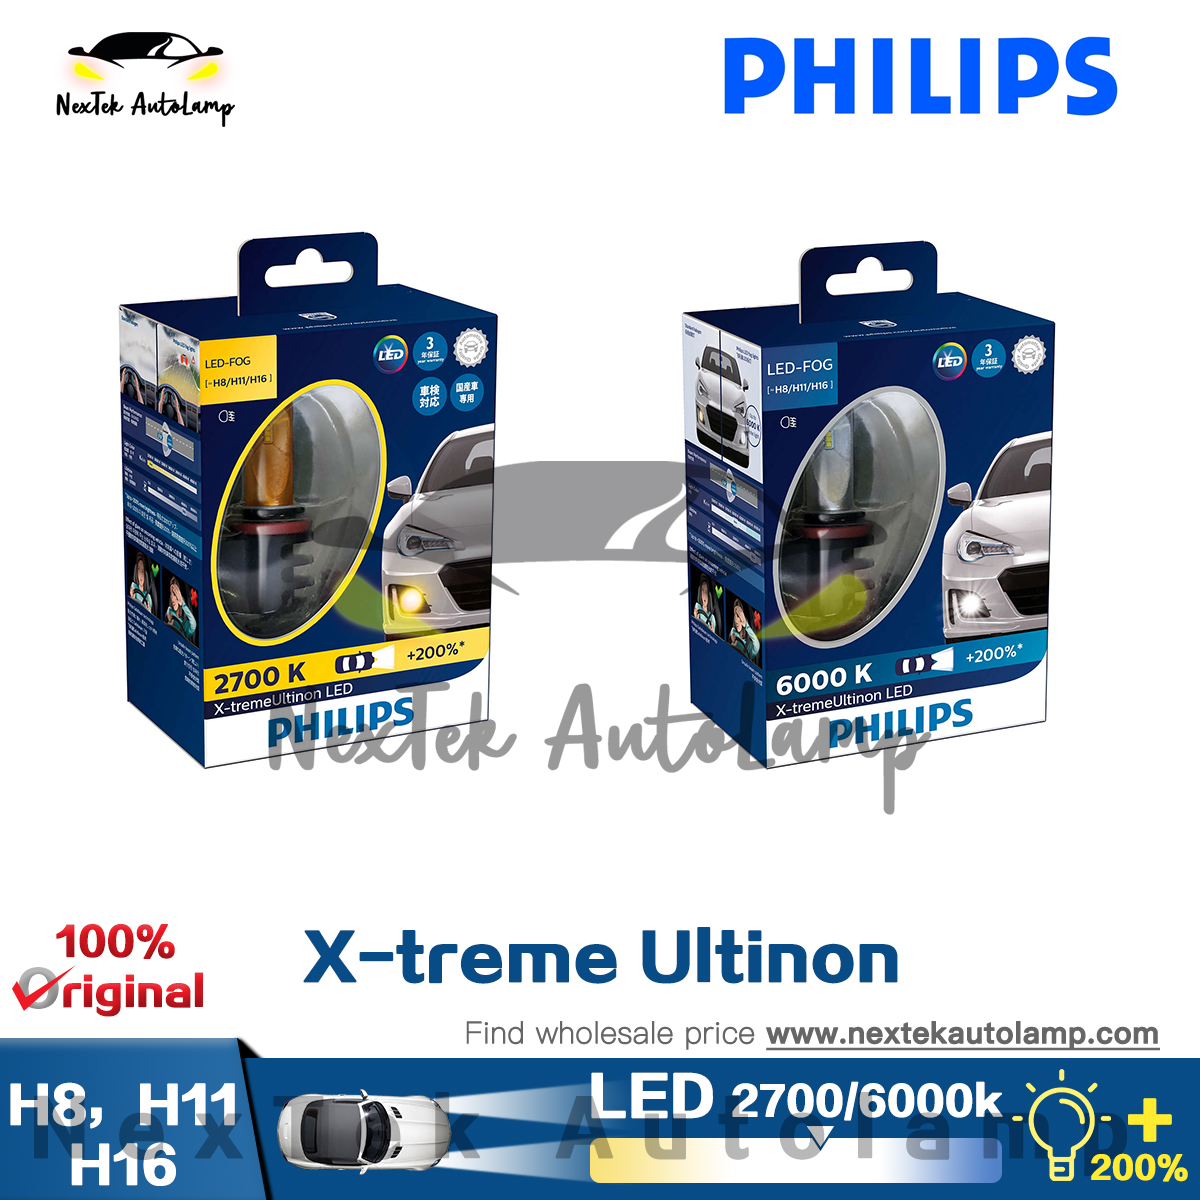 Philips LED H8 H11 H16 2700K Golden Yellow X-treme Ultinon LED All Weather  Light Fog Auto Lamp +200% Brighter 12793UNI X2, Pair